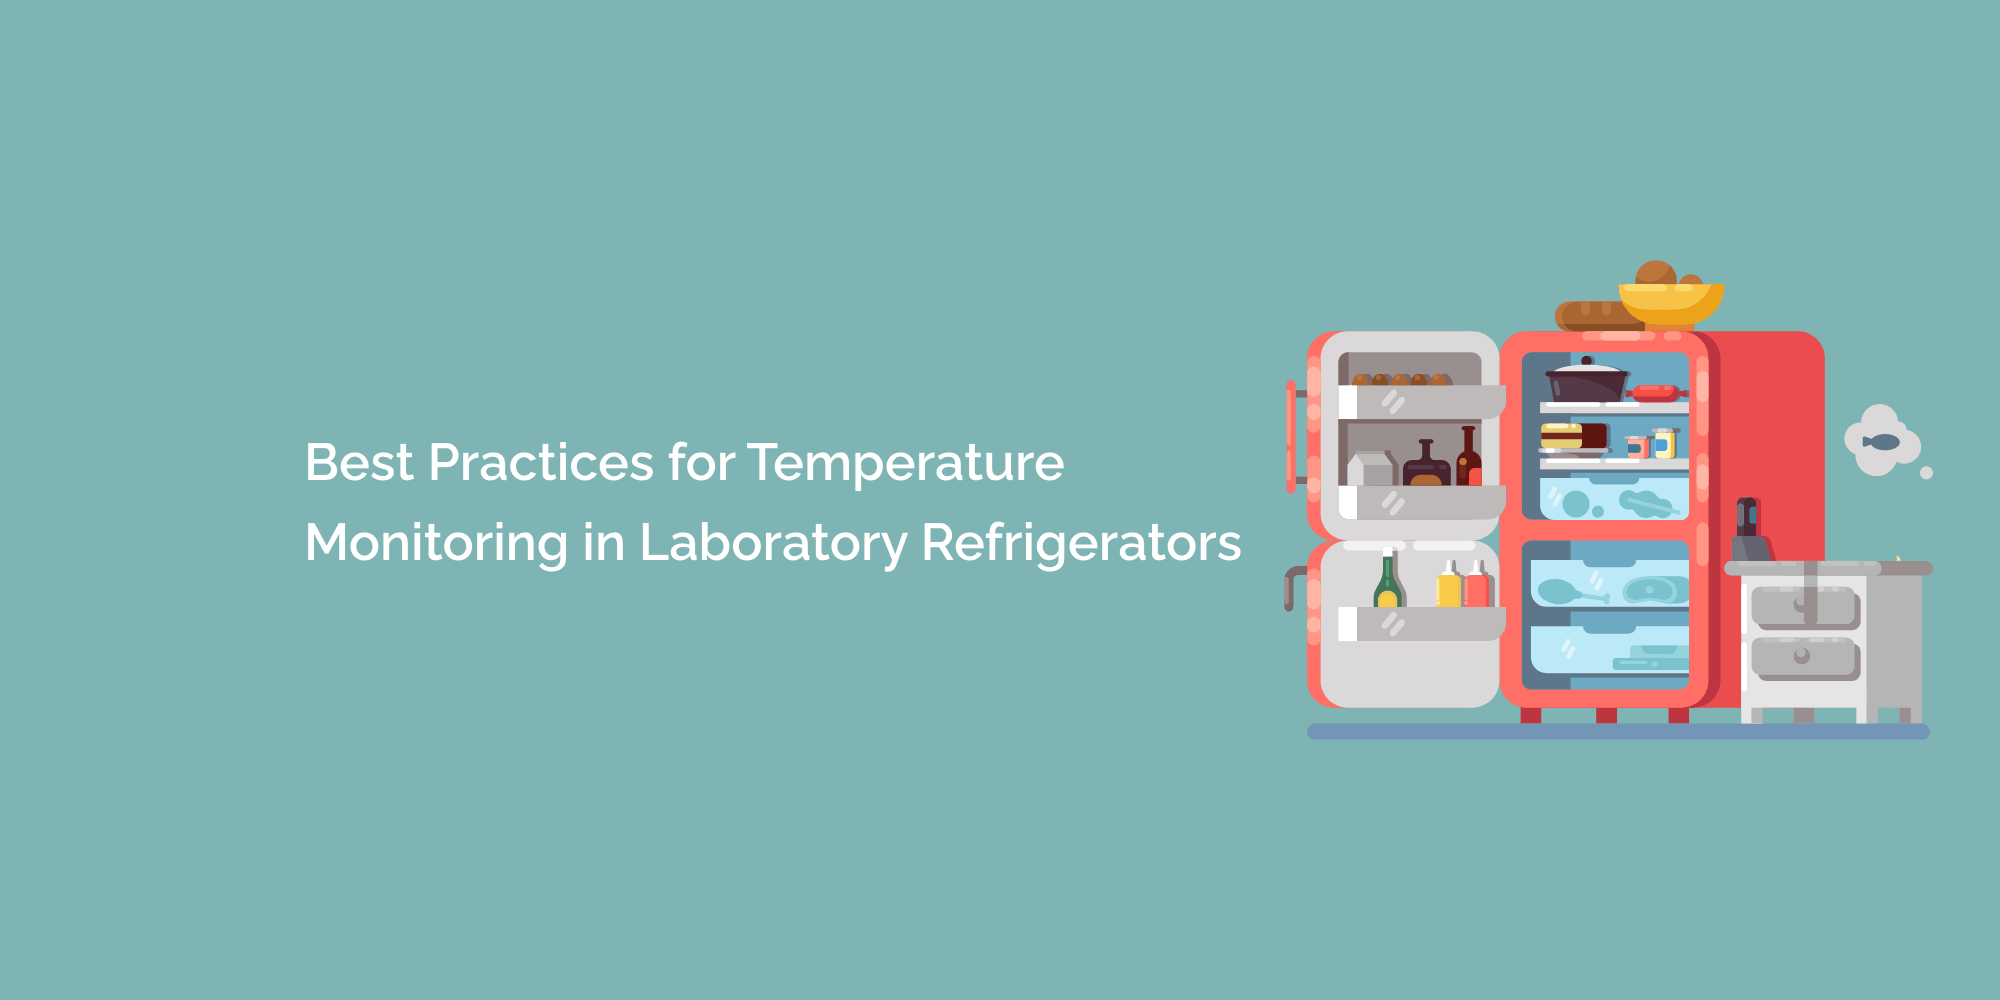 Best Practices for Temperature Monitoring in Laboratory Refrigerators